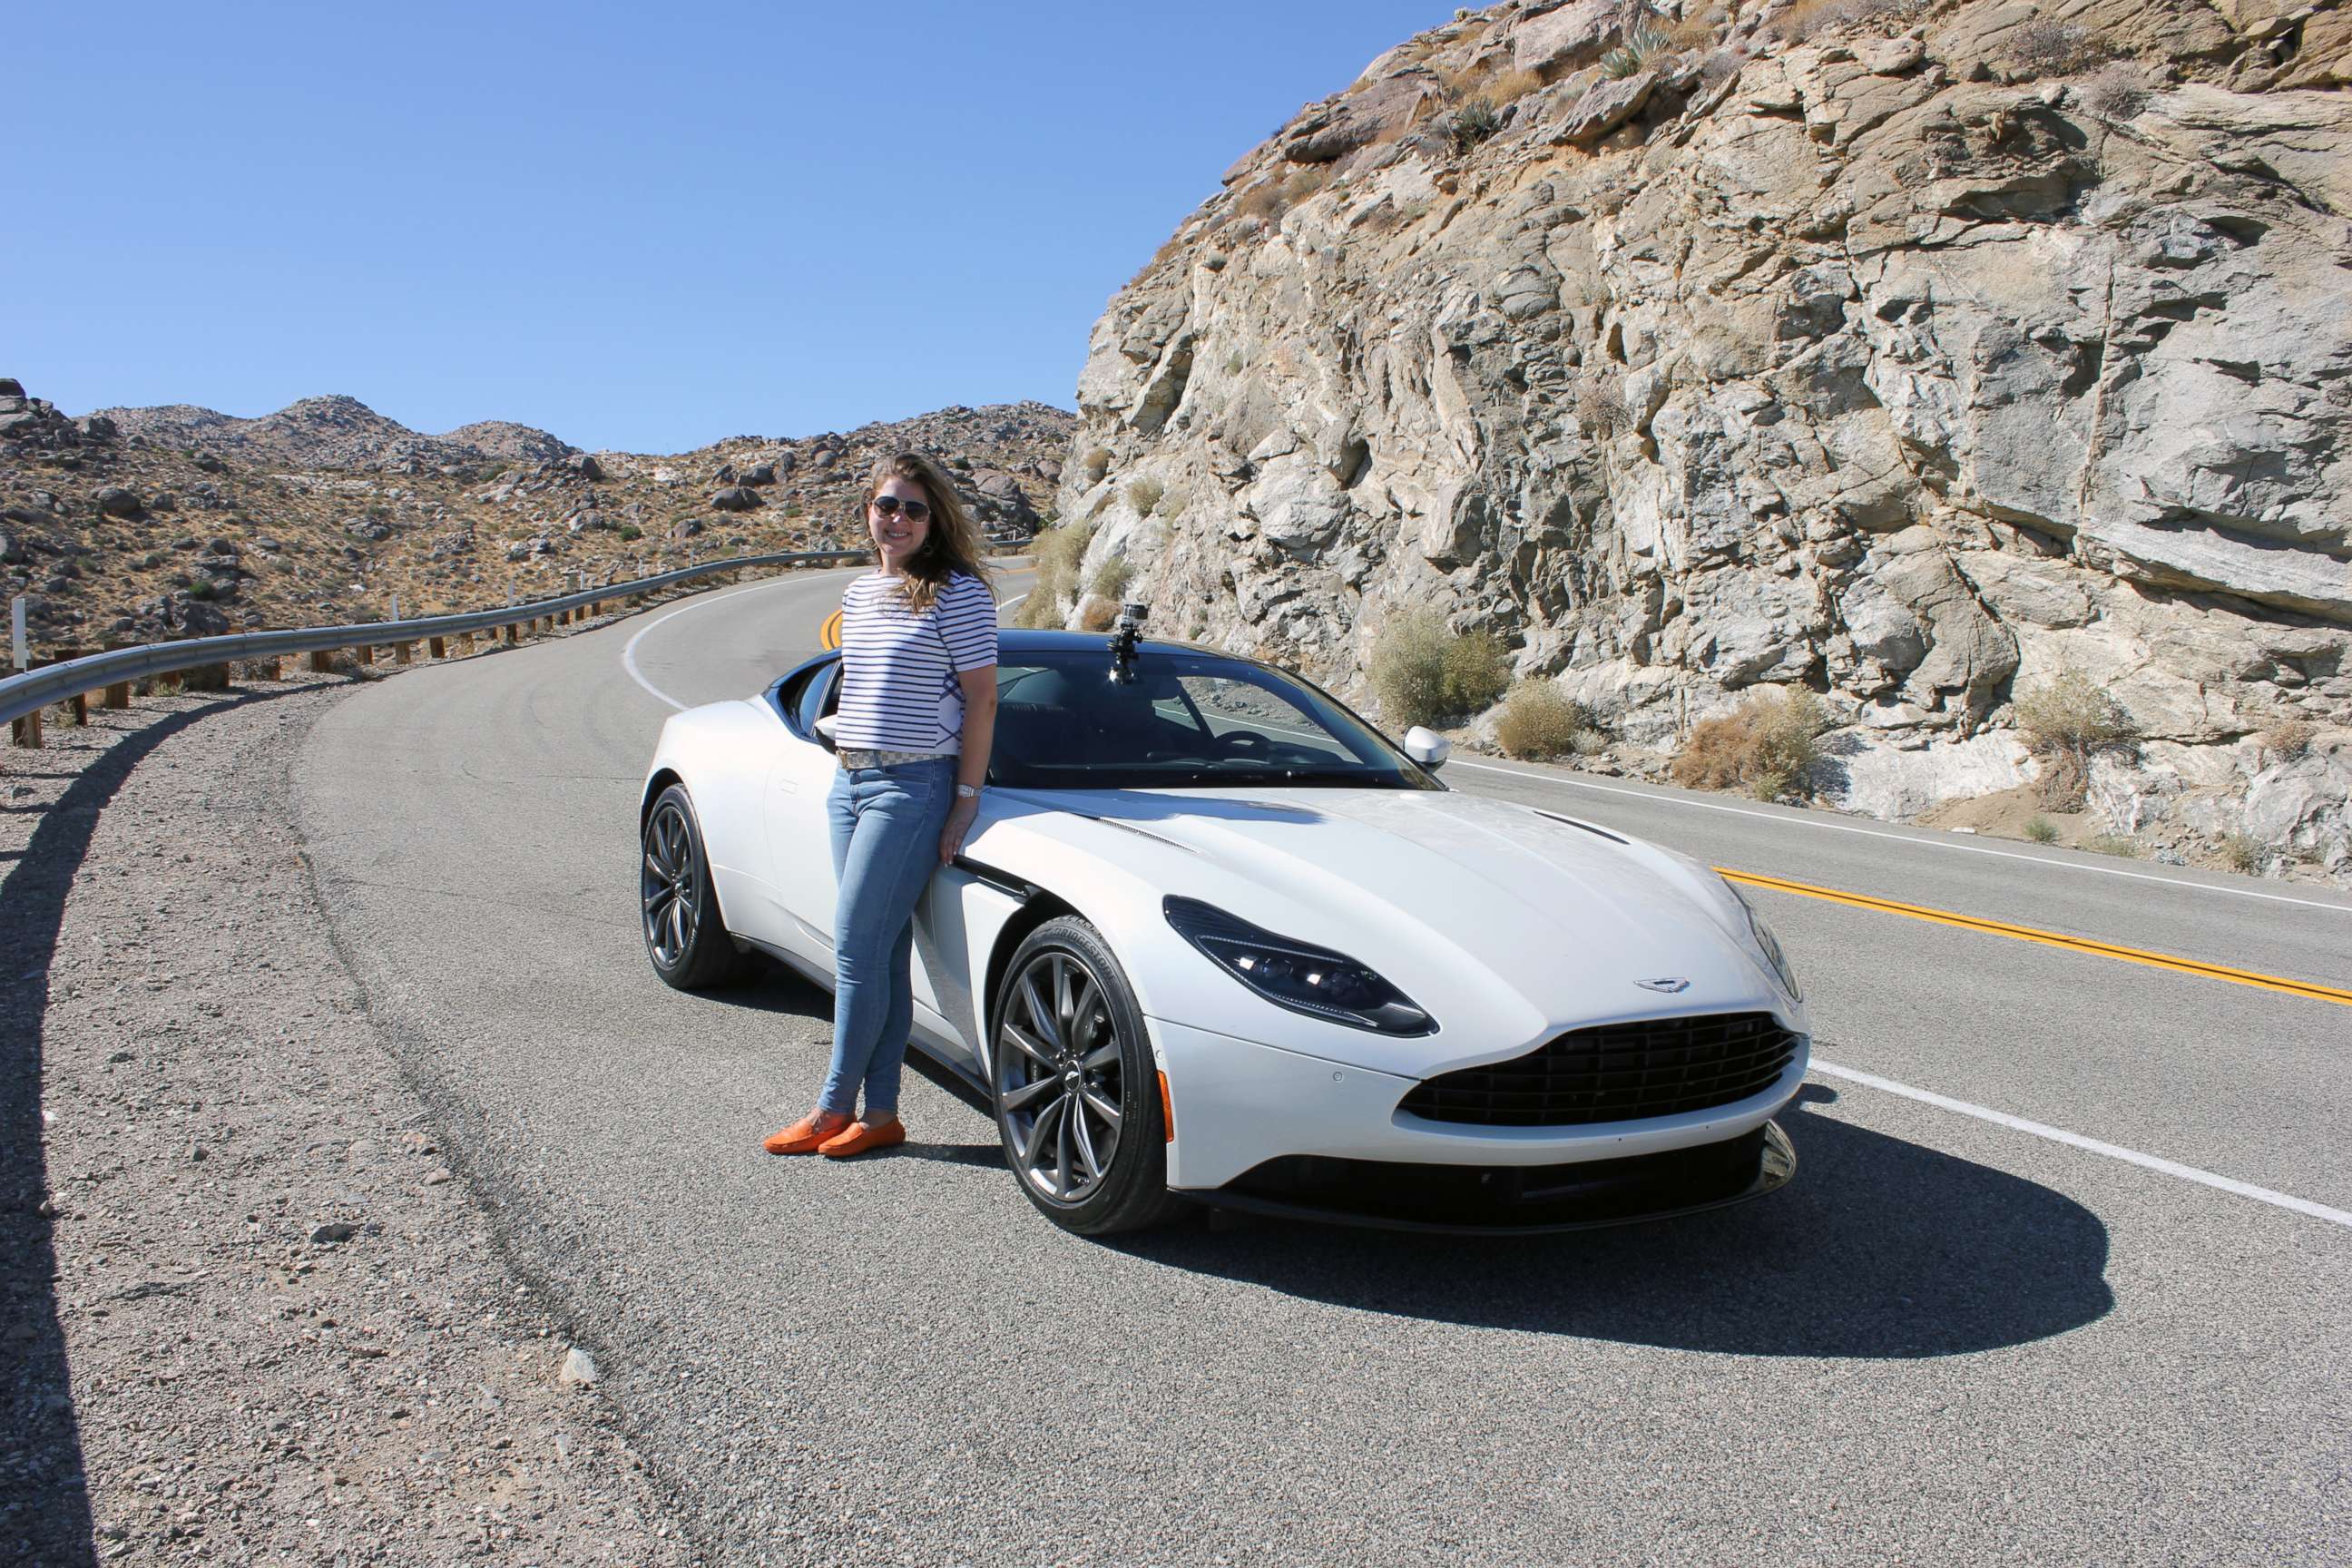 PHOTO: ABC News' Morgan Korn test drove the DB11 V8 in California. Deliveries in the U.S. begin this month.